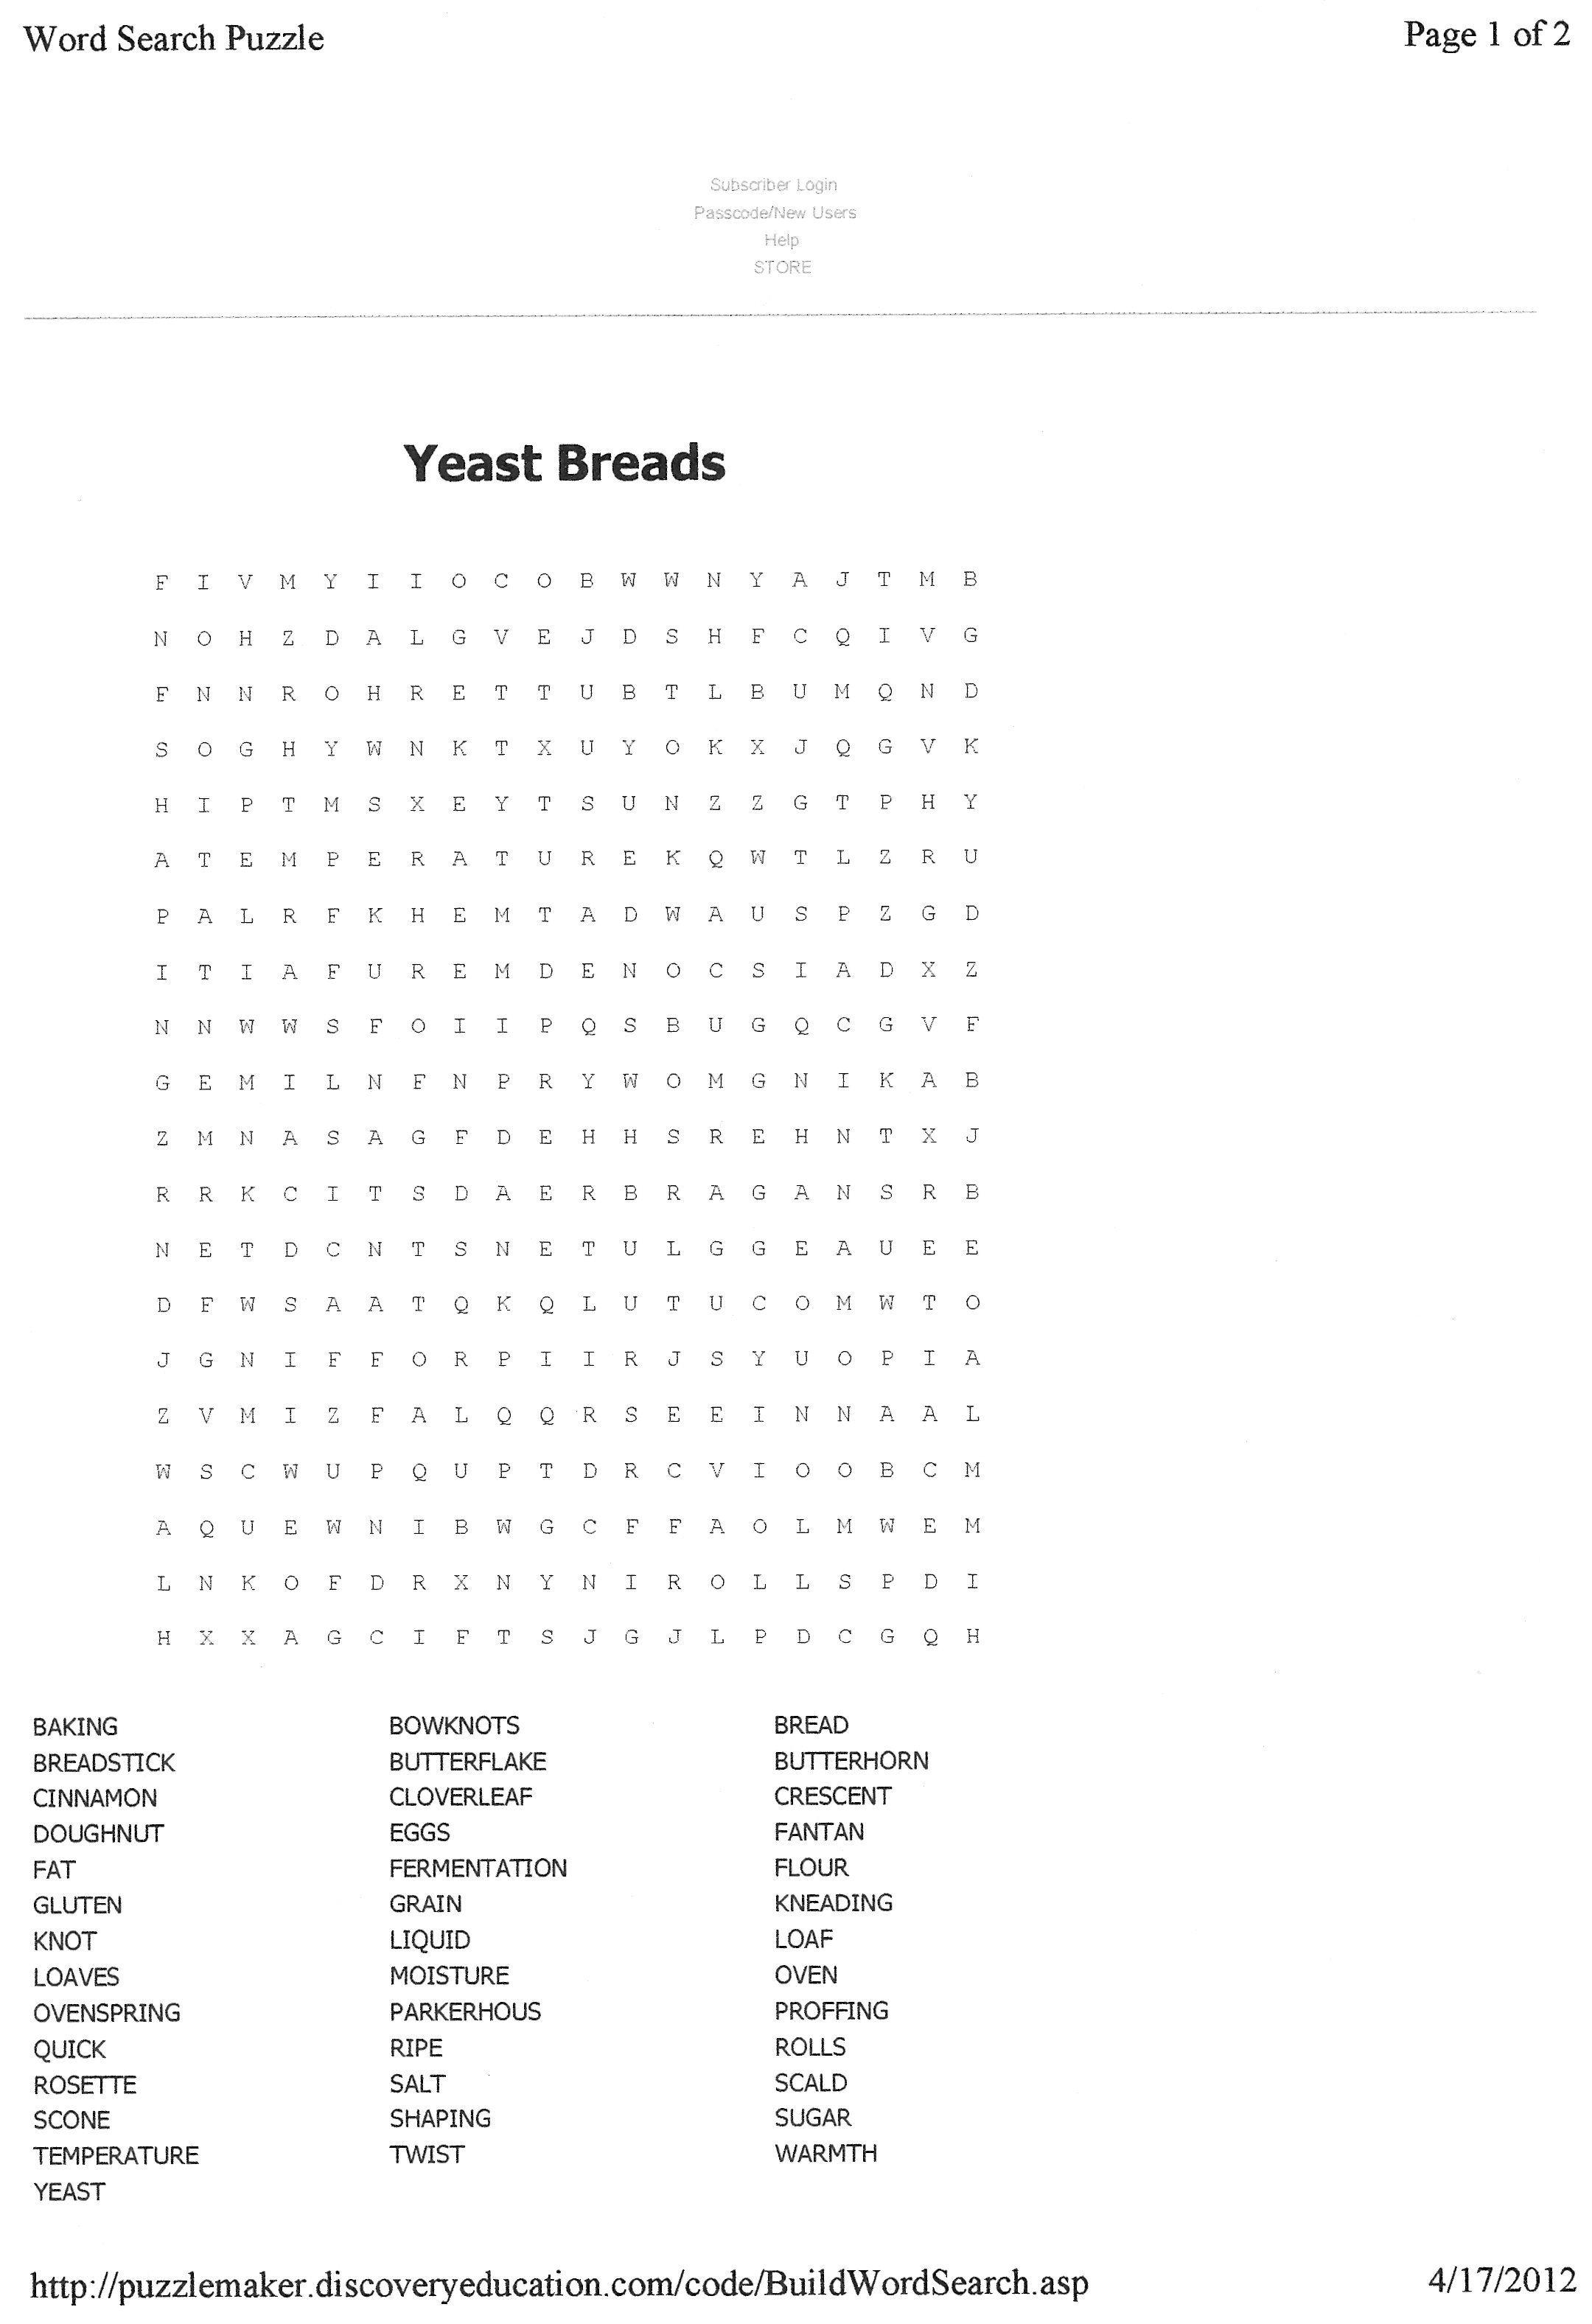 Yeast Bread Word Search Image